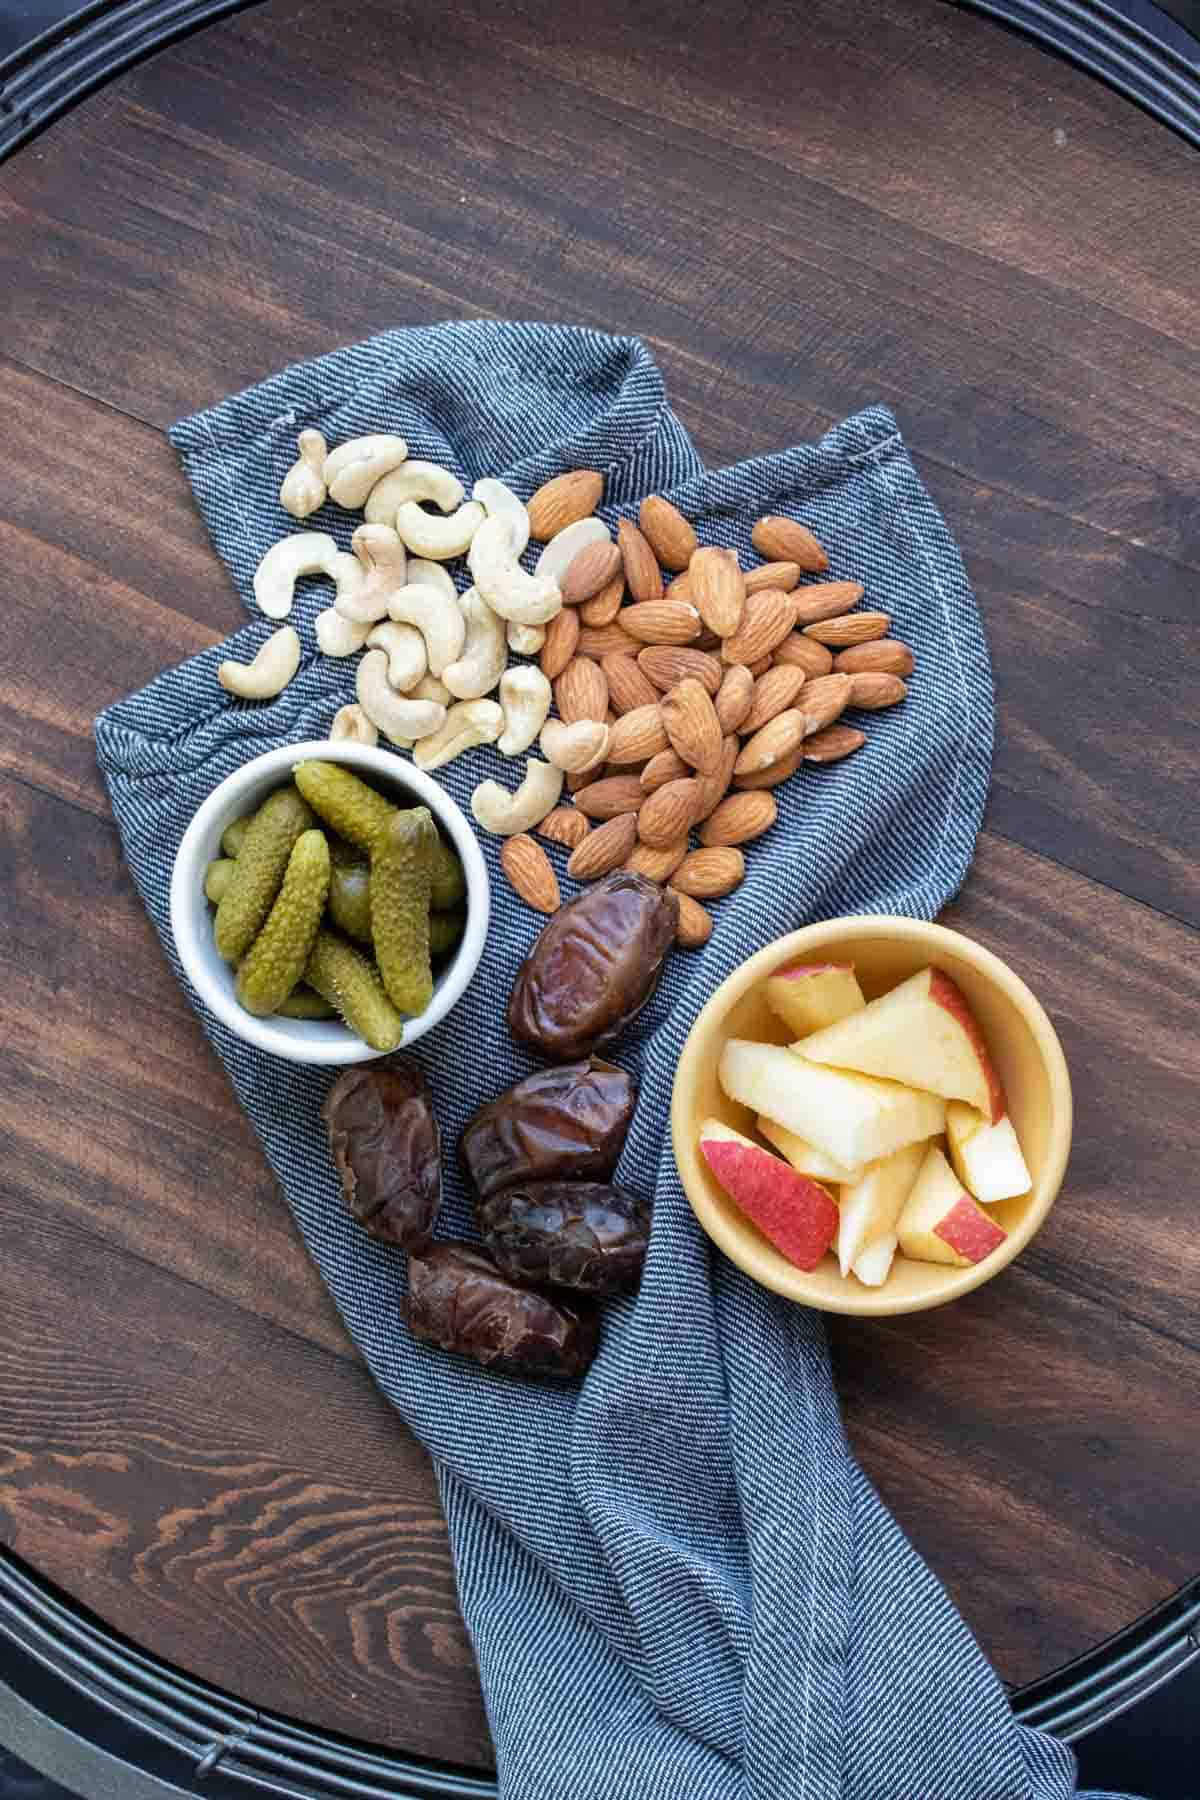 Nuts, pickles and fruit in bowls and laying on a navy towel.